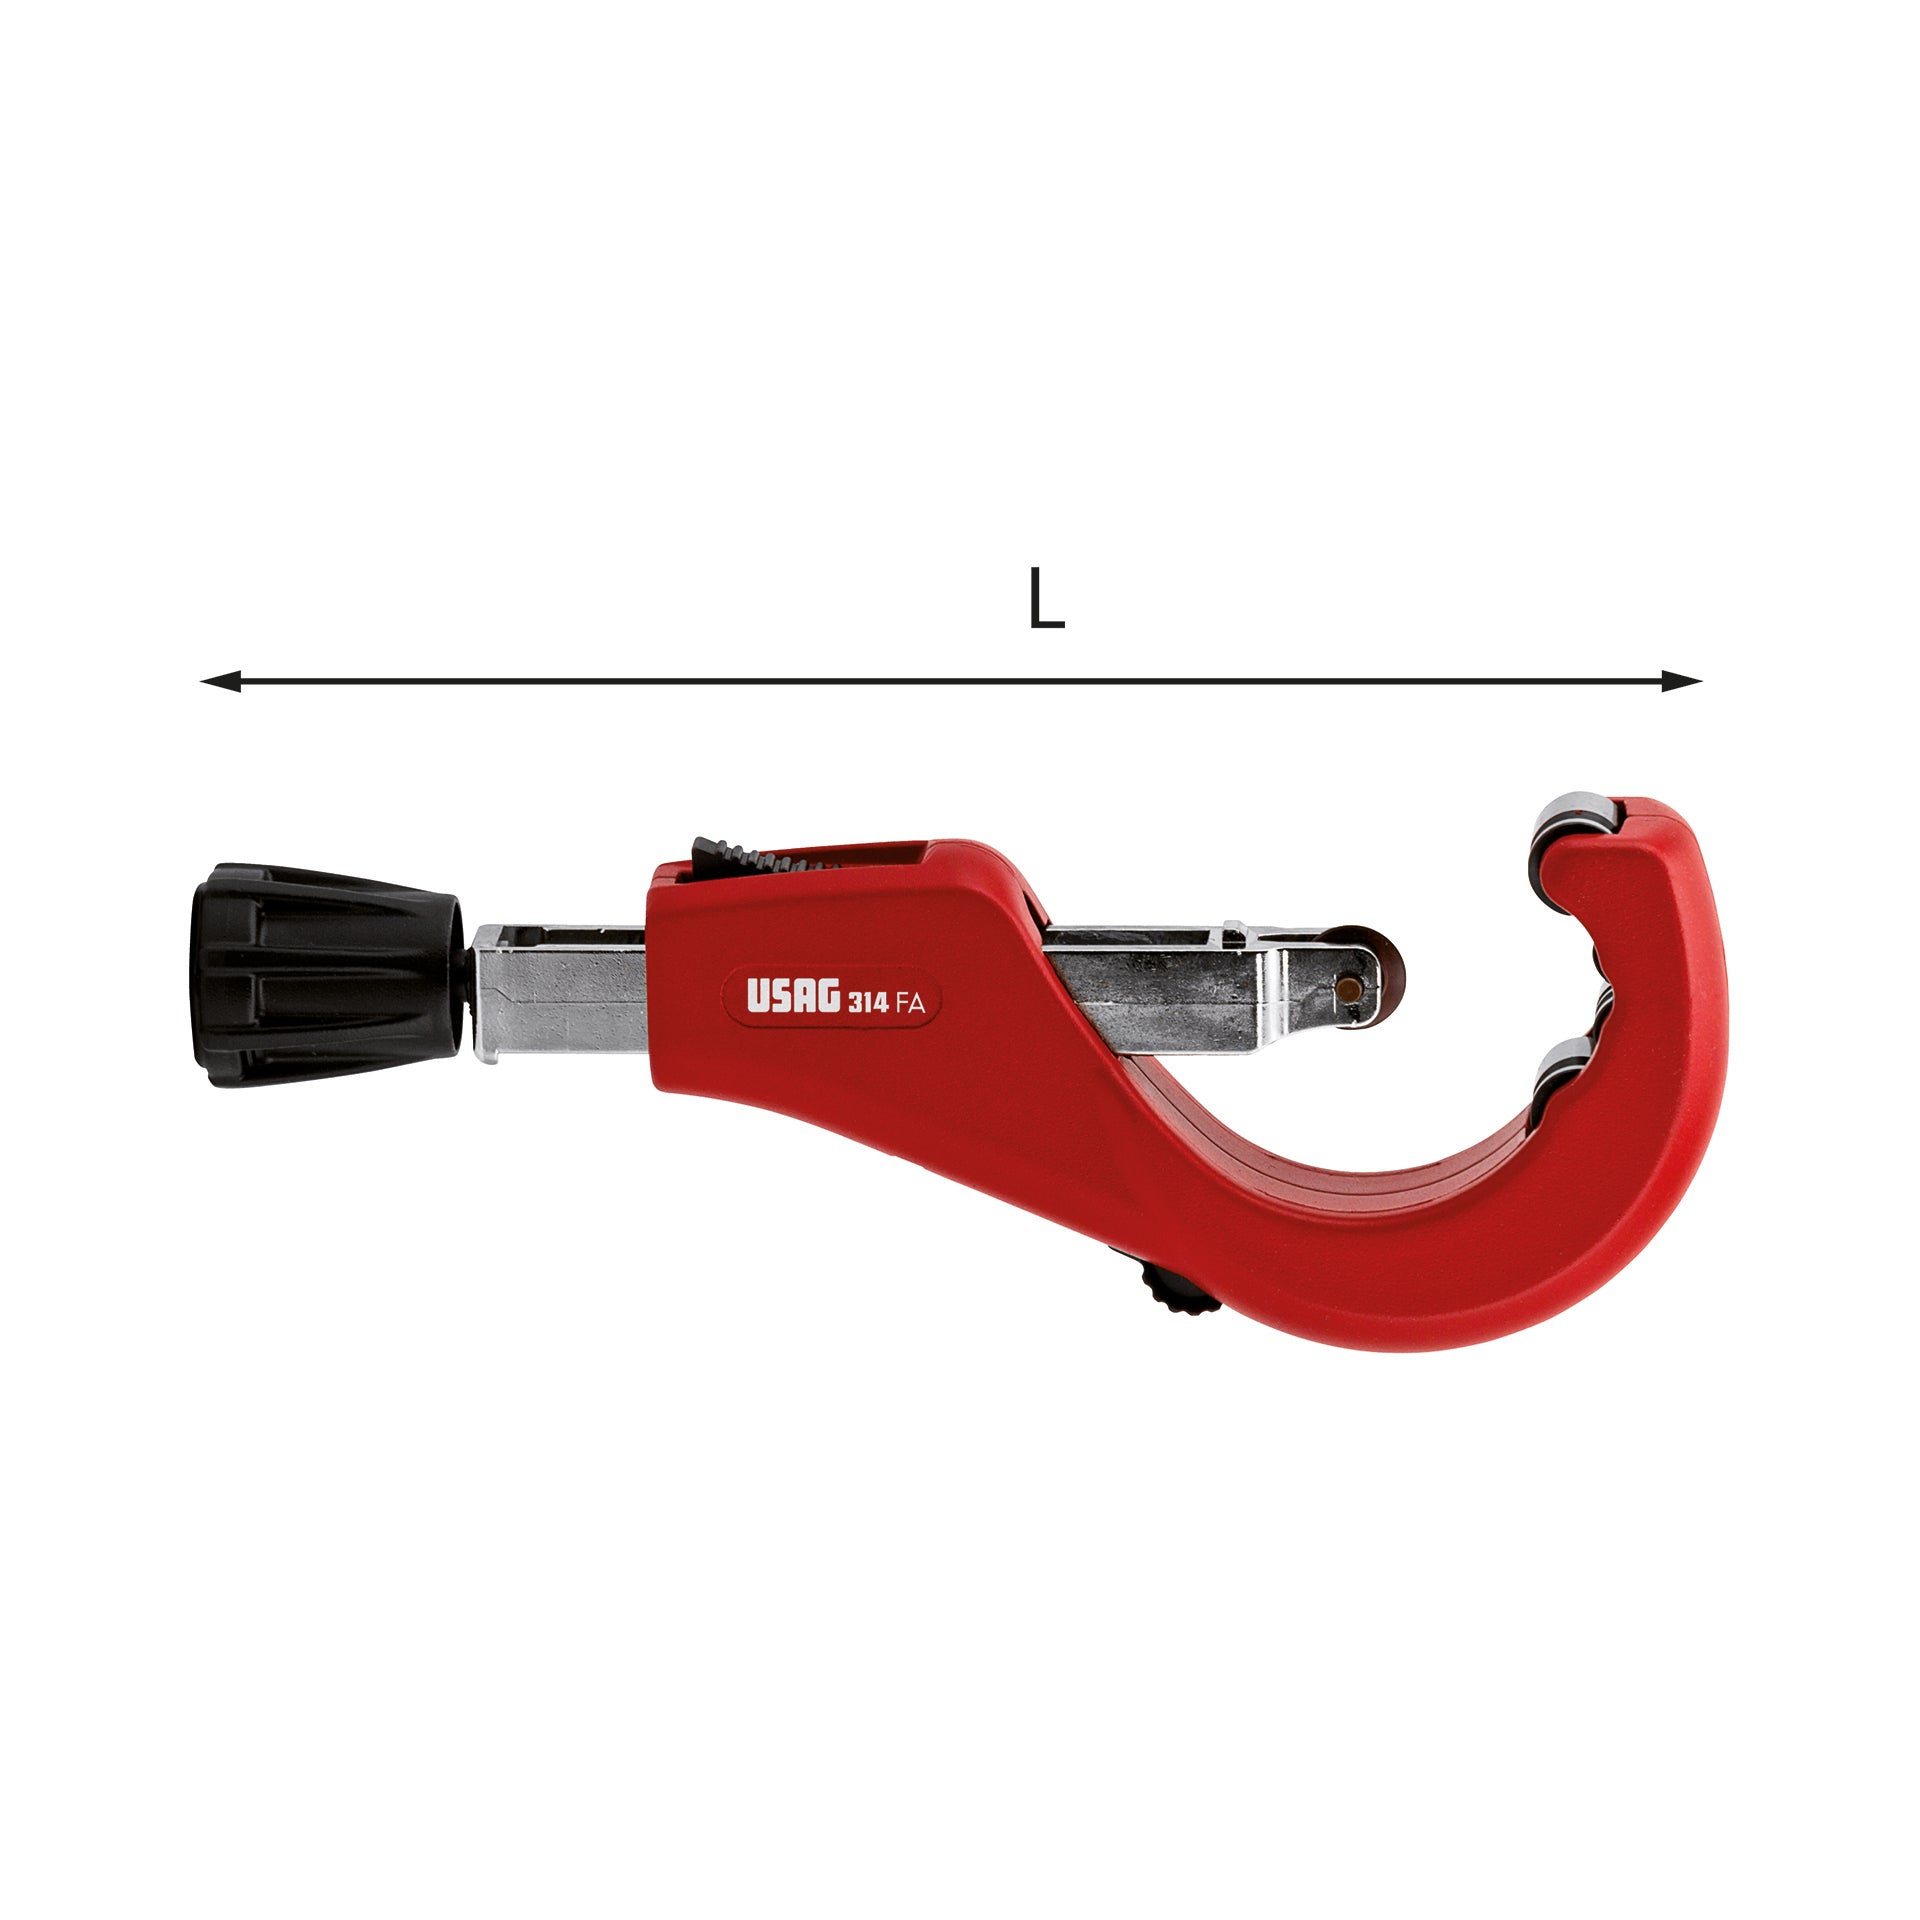 Tube pipe cutter for copper and light alloy tube Ø 6-76mm Ø 1/4-3" 890gr 314 FA